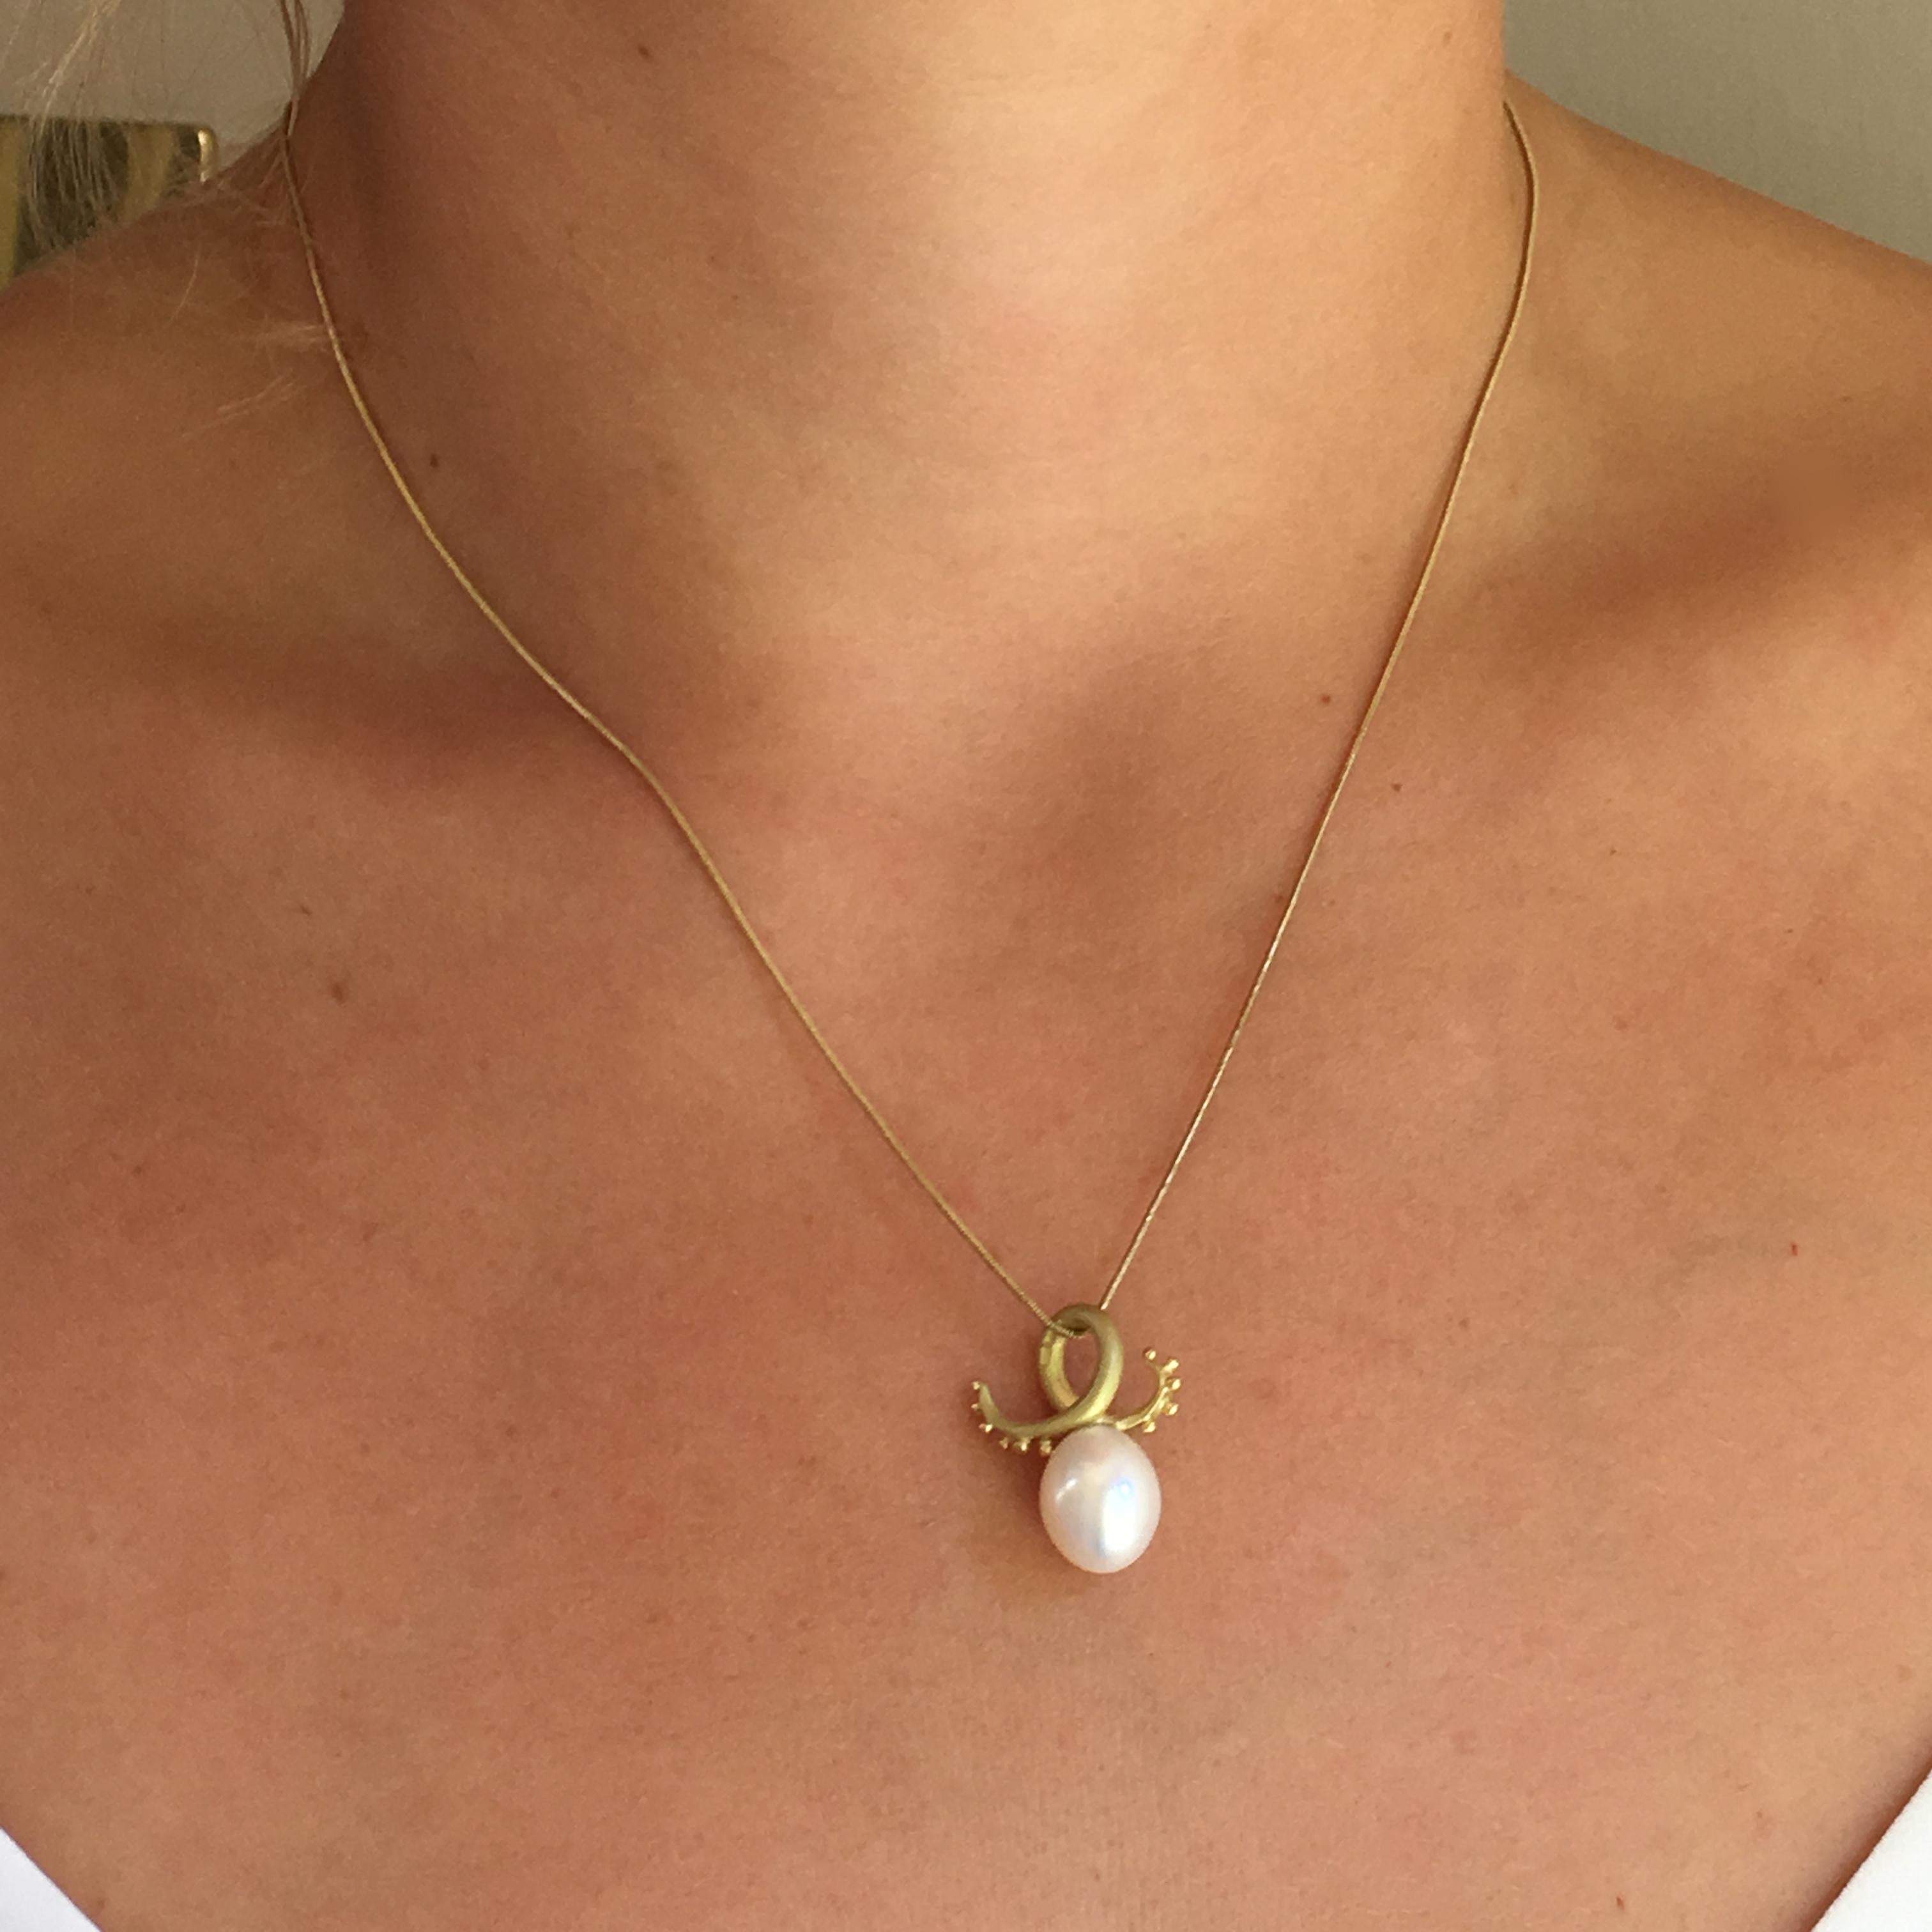 Annabel Eley 18 Karat Yellow Gold White Pearl Pendant Necklace In New Condition For Sale In Huntingdon, GB